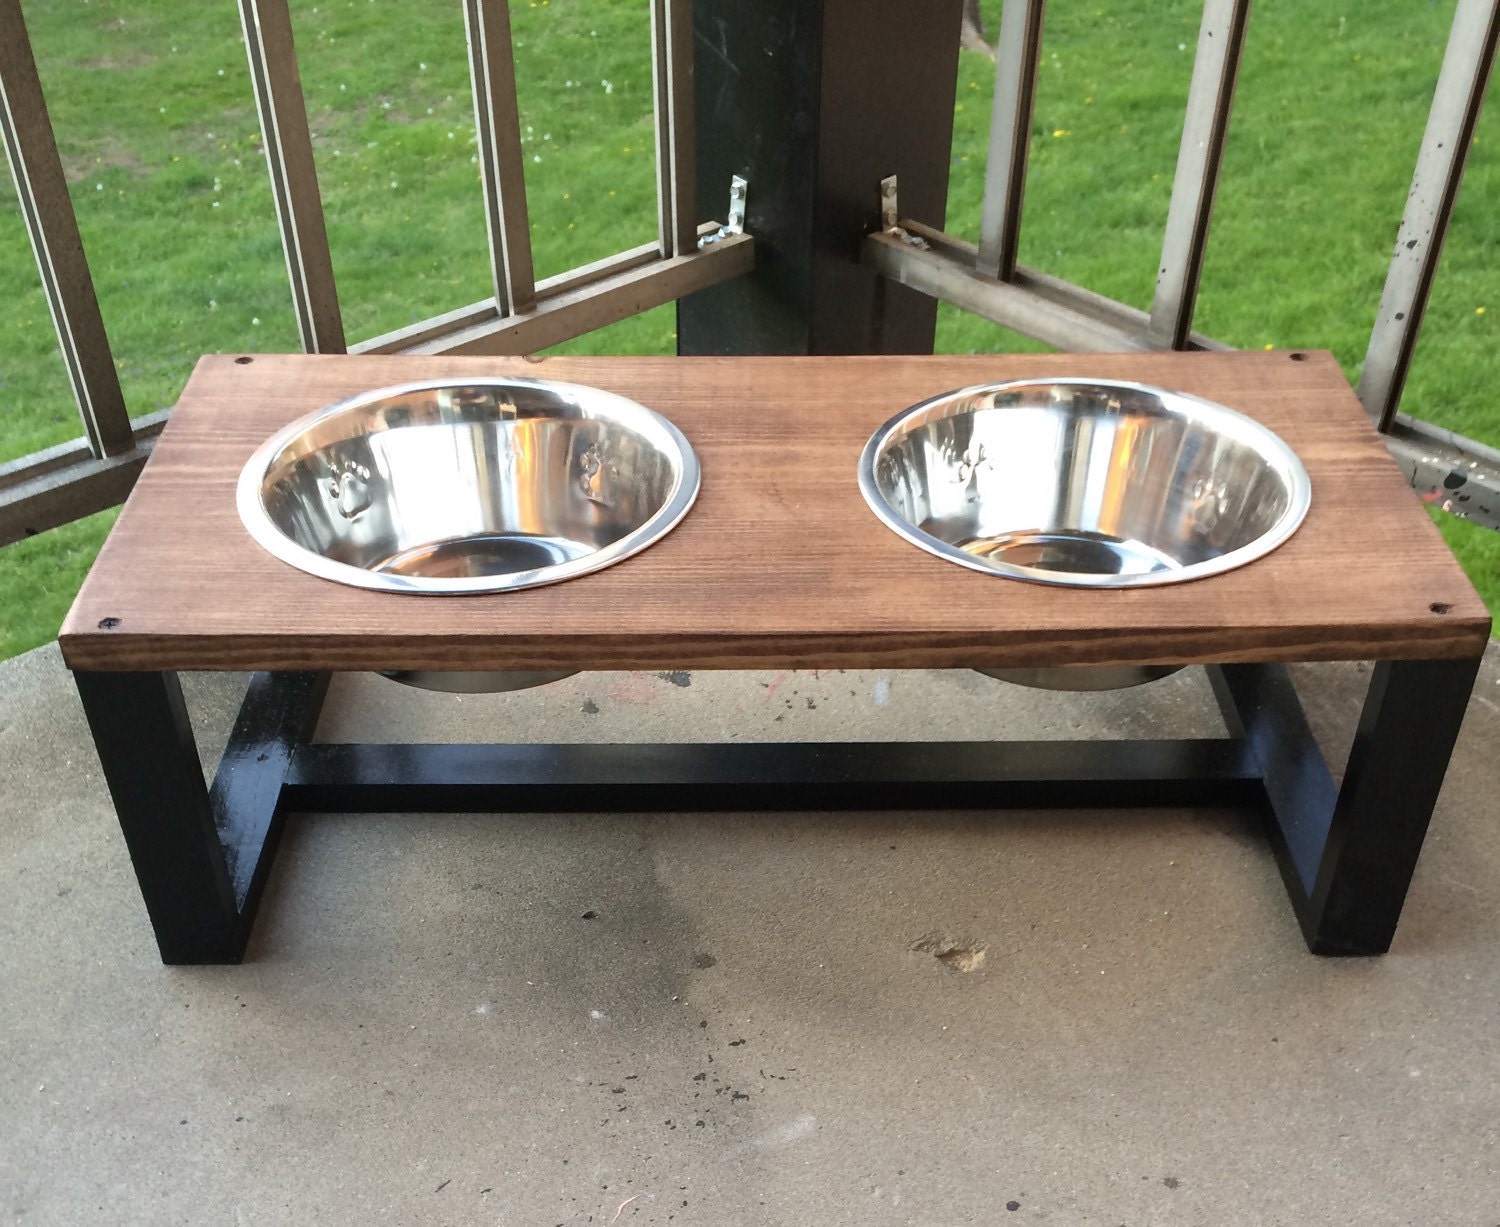 diy modern pet bowl stand – almost makes perfect